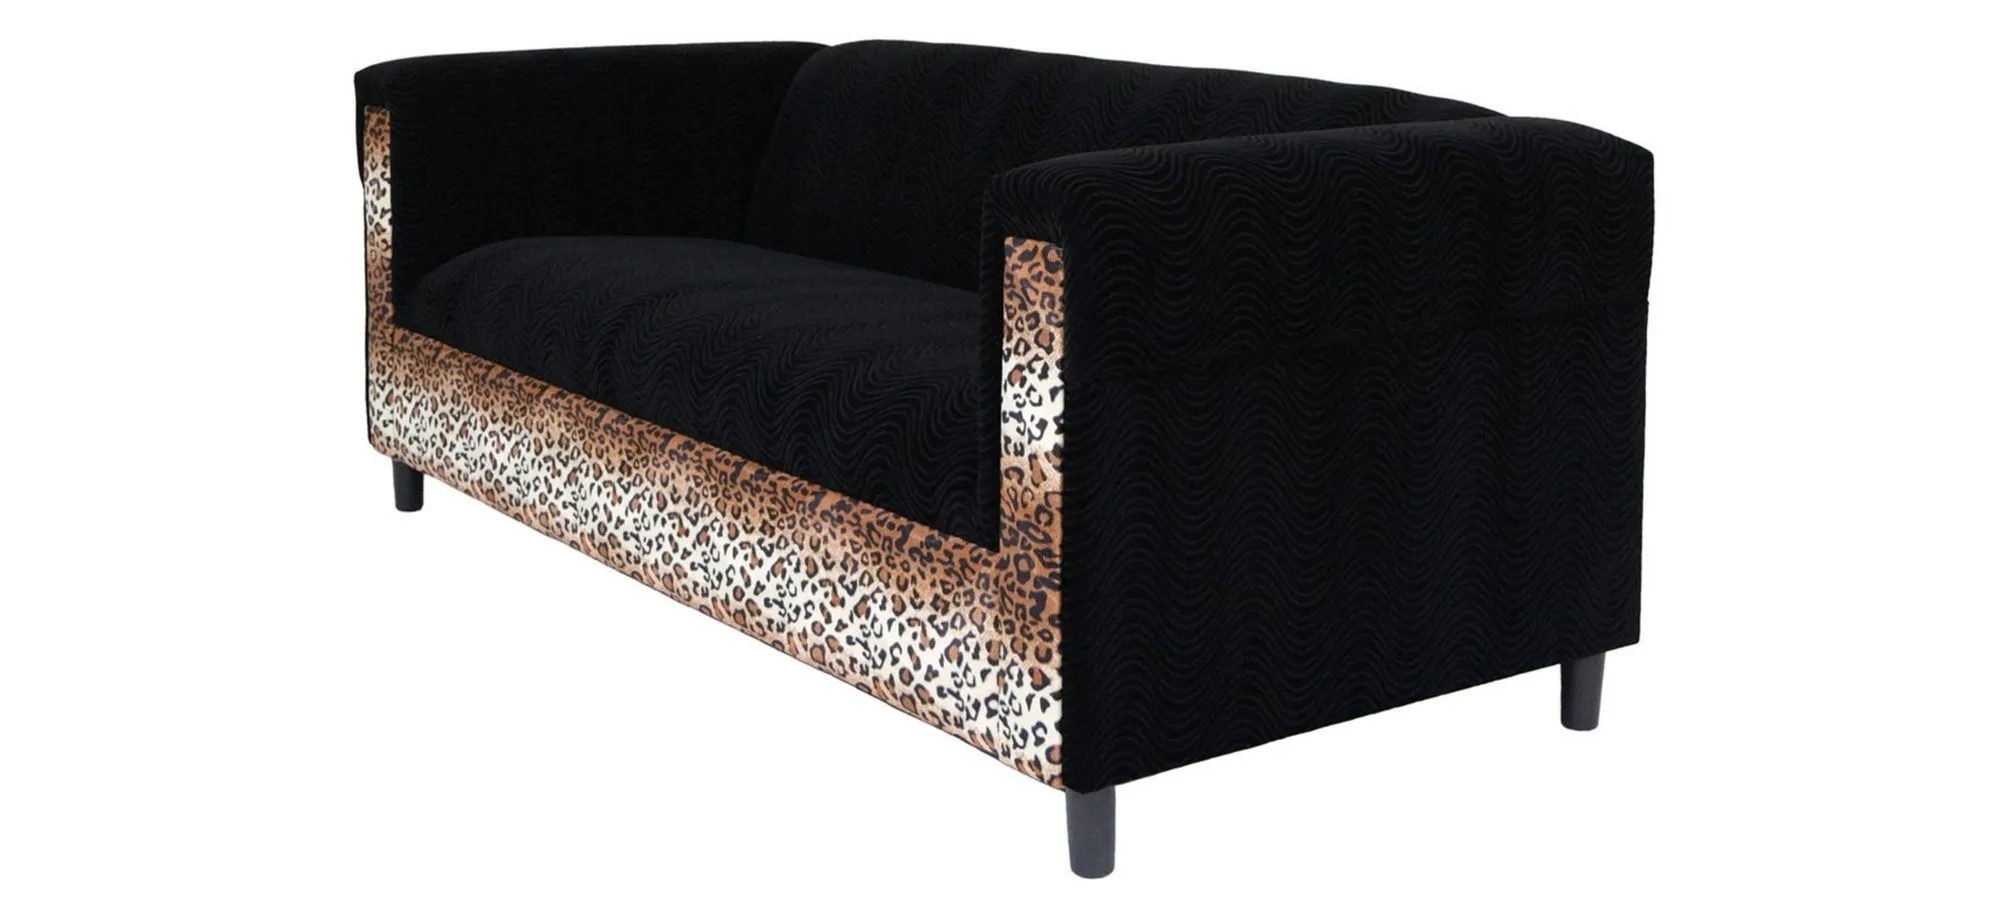 Ailani Sofa in Black by HomeRoots